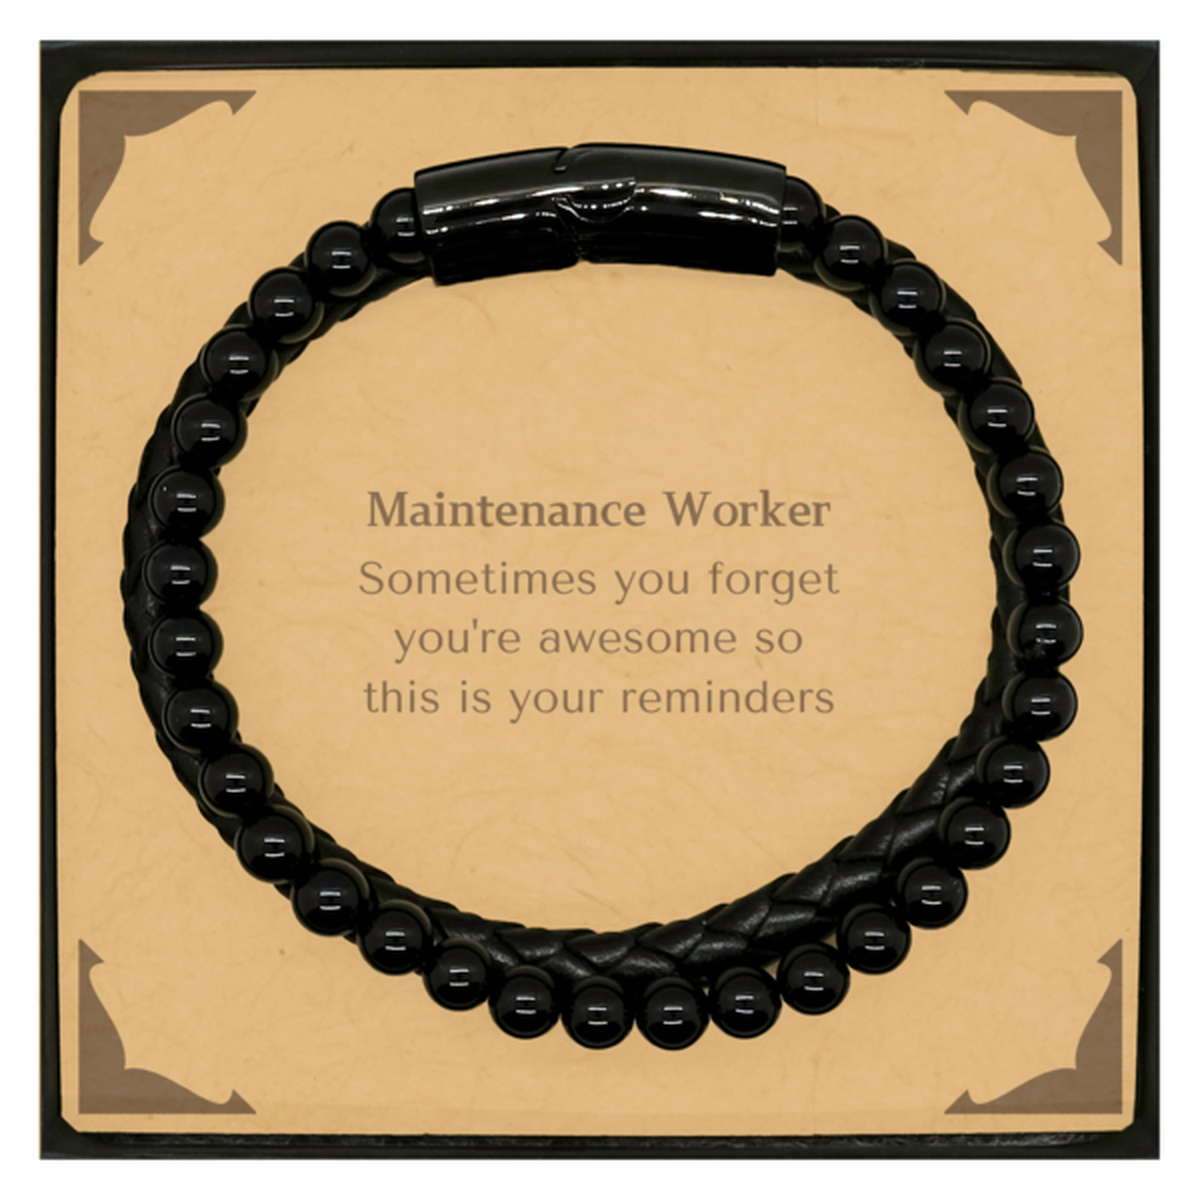 Sentimental Maintenance Worker Stone Leather Bracelets, Maintenance Worker Sometimes you forget you're awesome so this is your reminders, Graduation Christmas Birthday Gifts for Maintenance Worker, Men, Women, Coworkers